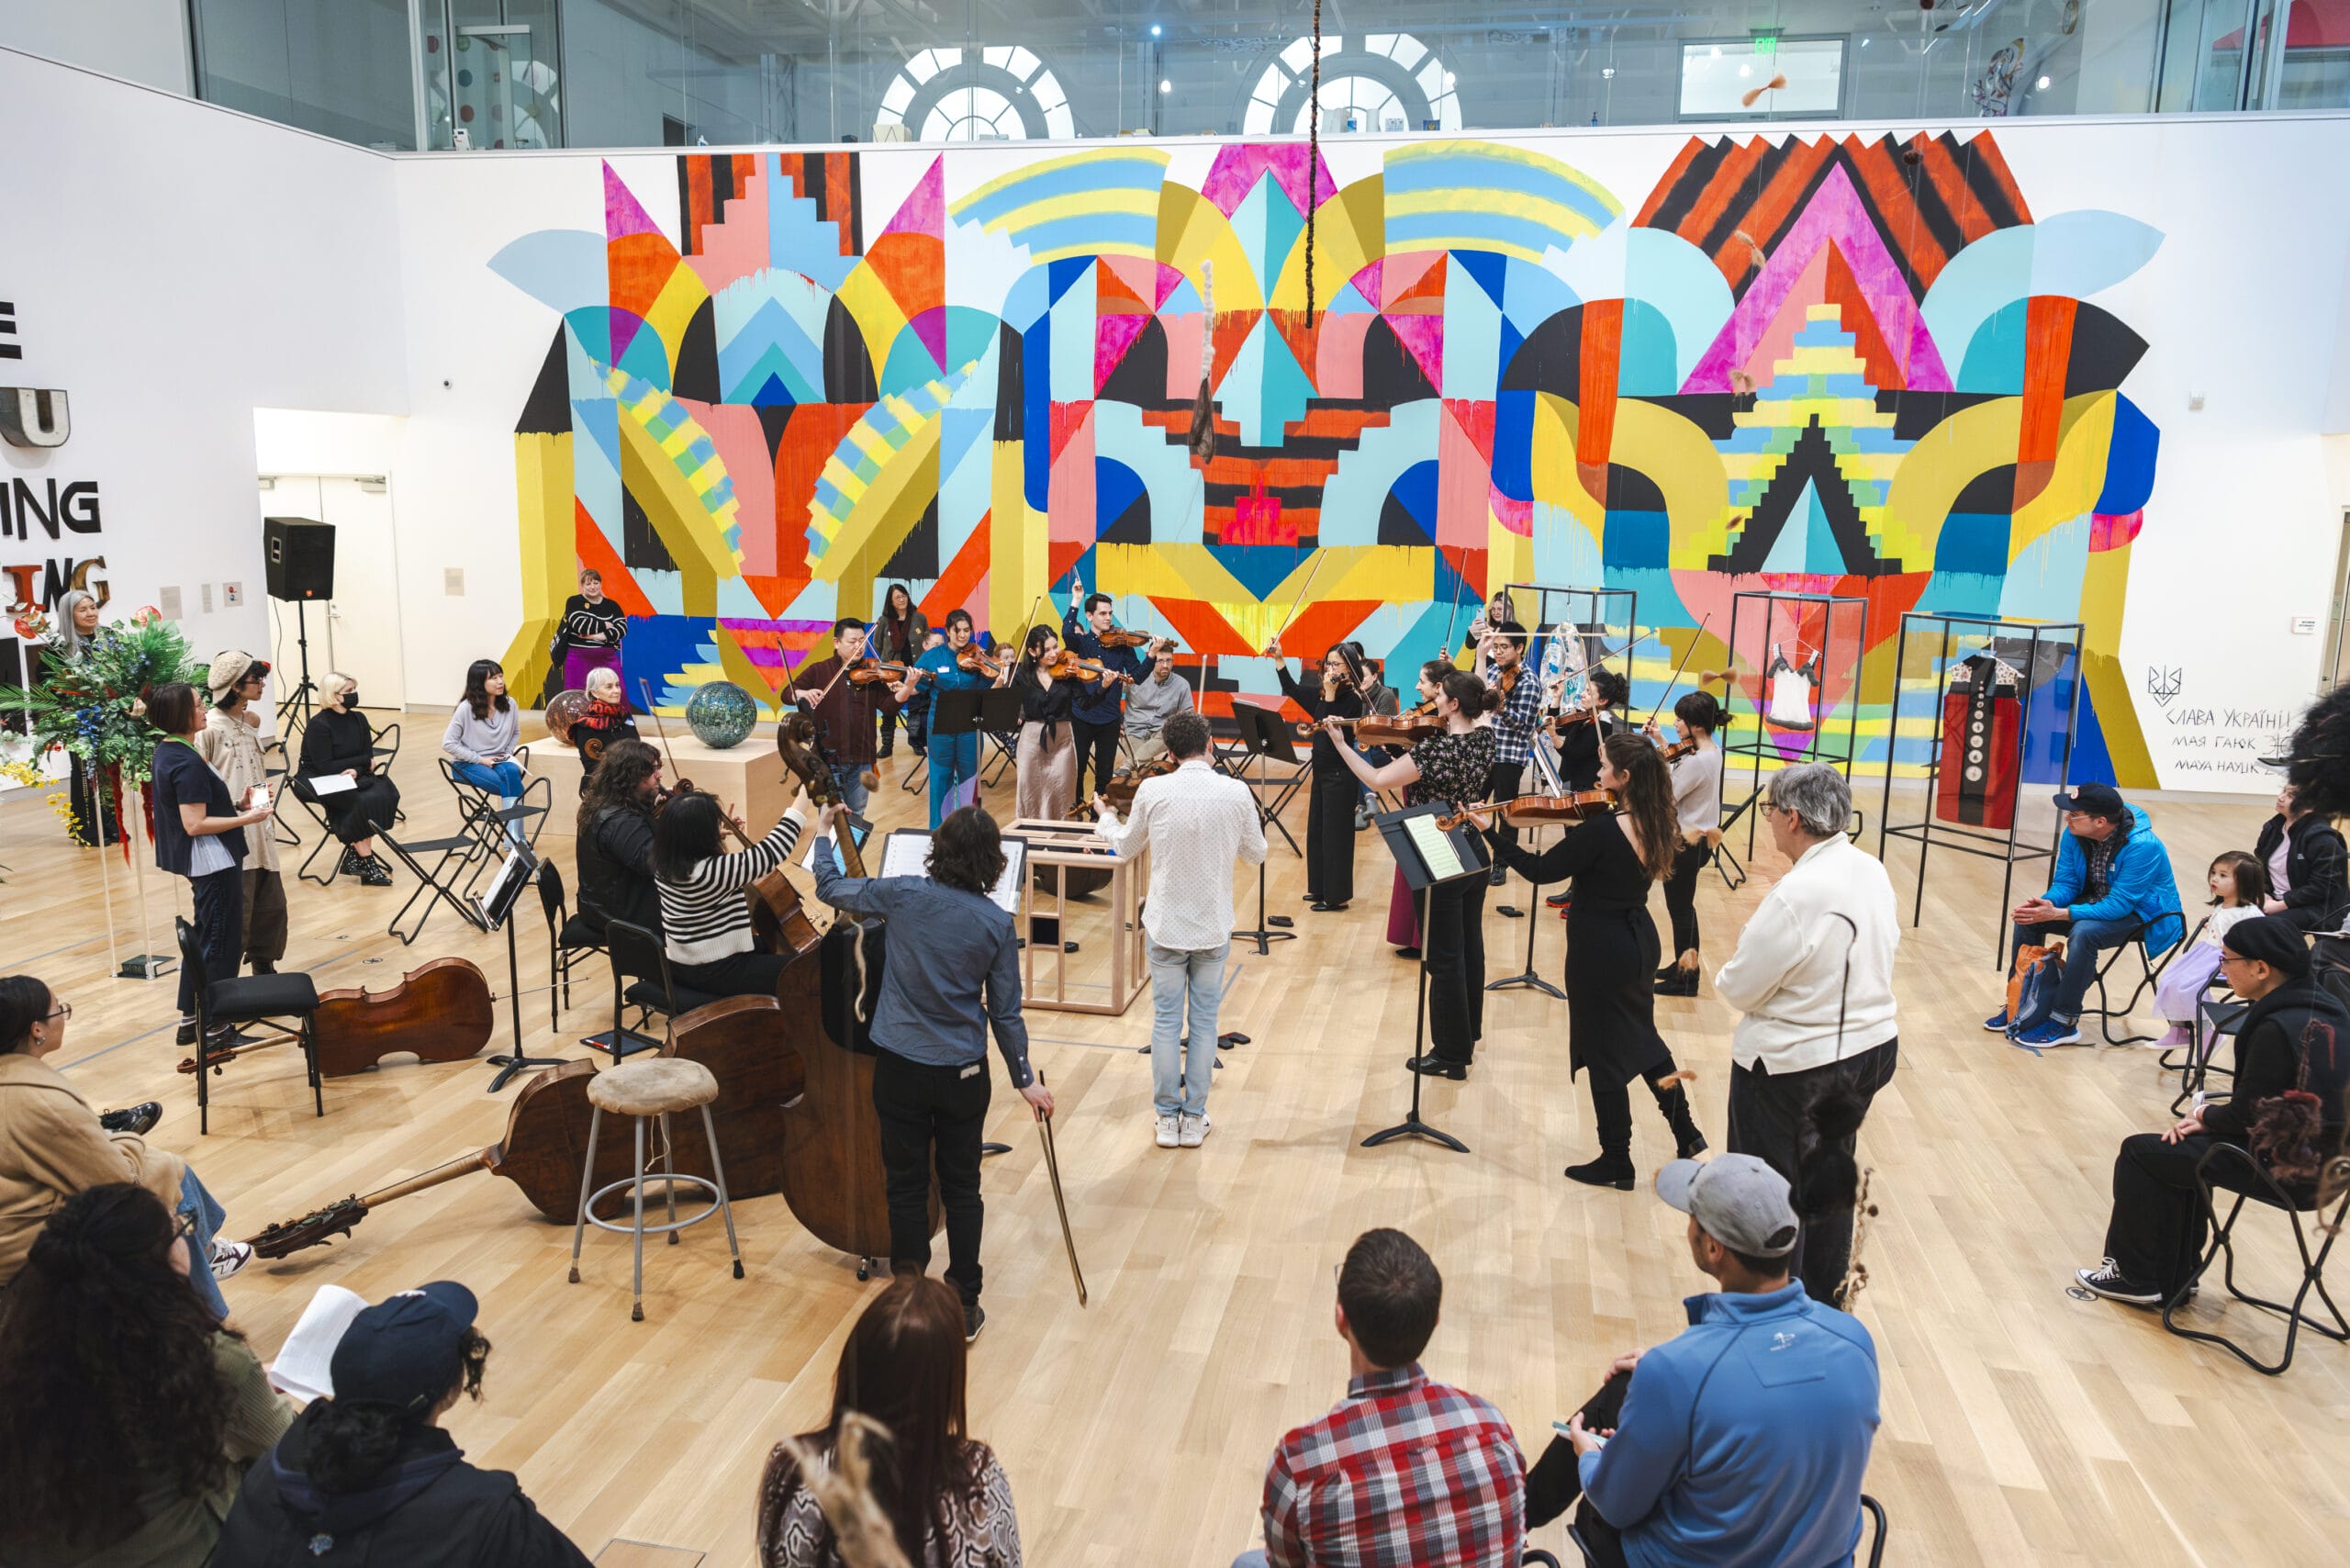 A string orchestra stands performing in the middle of an art gallery with a bright colorful artwork installed on the wall behind them.